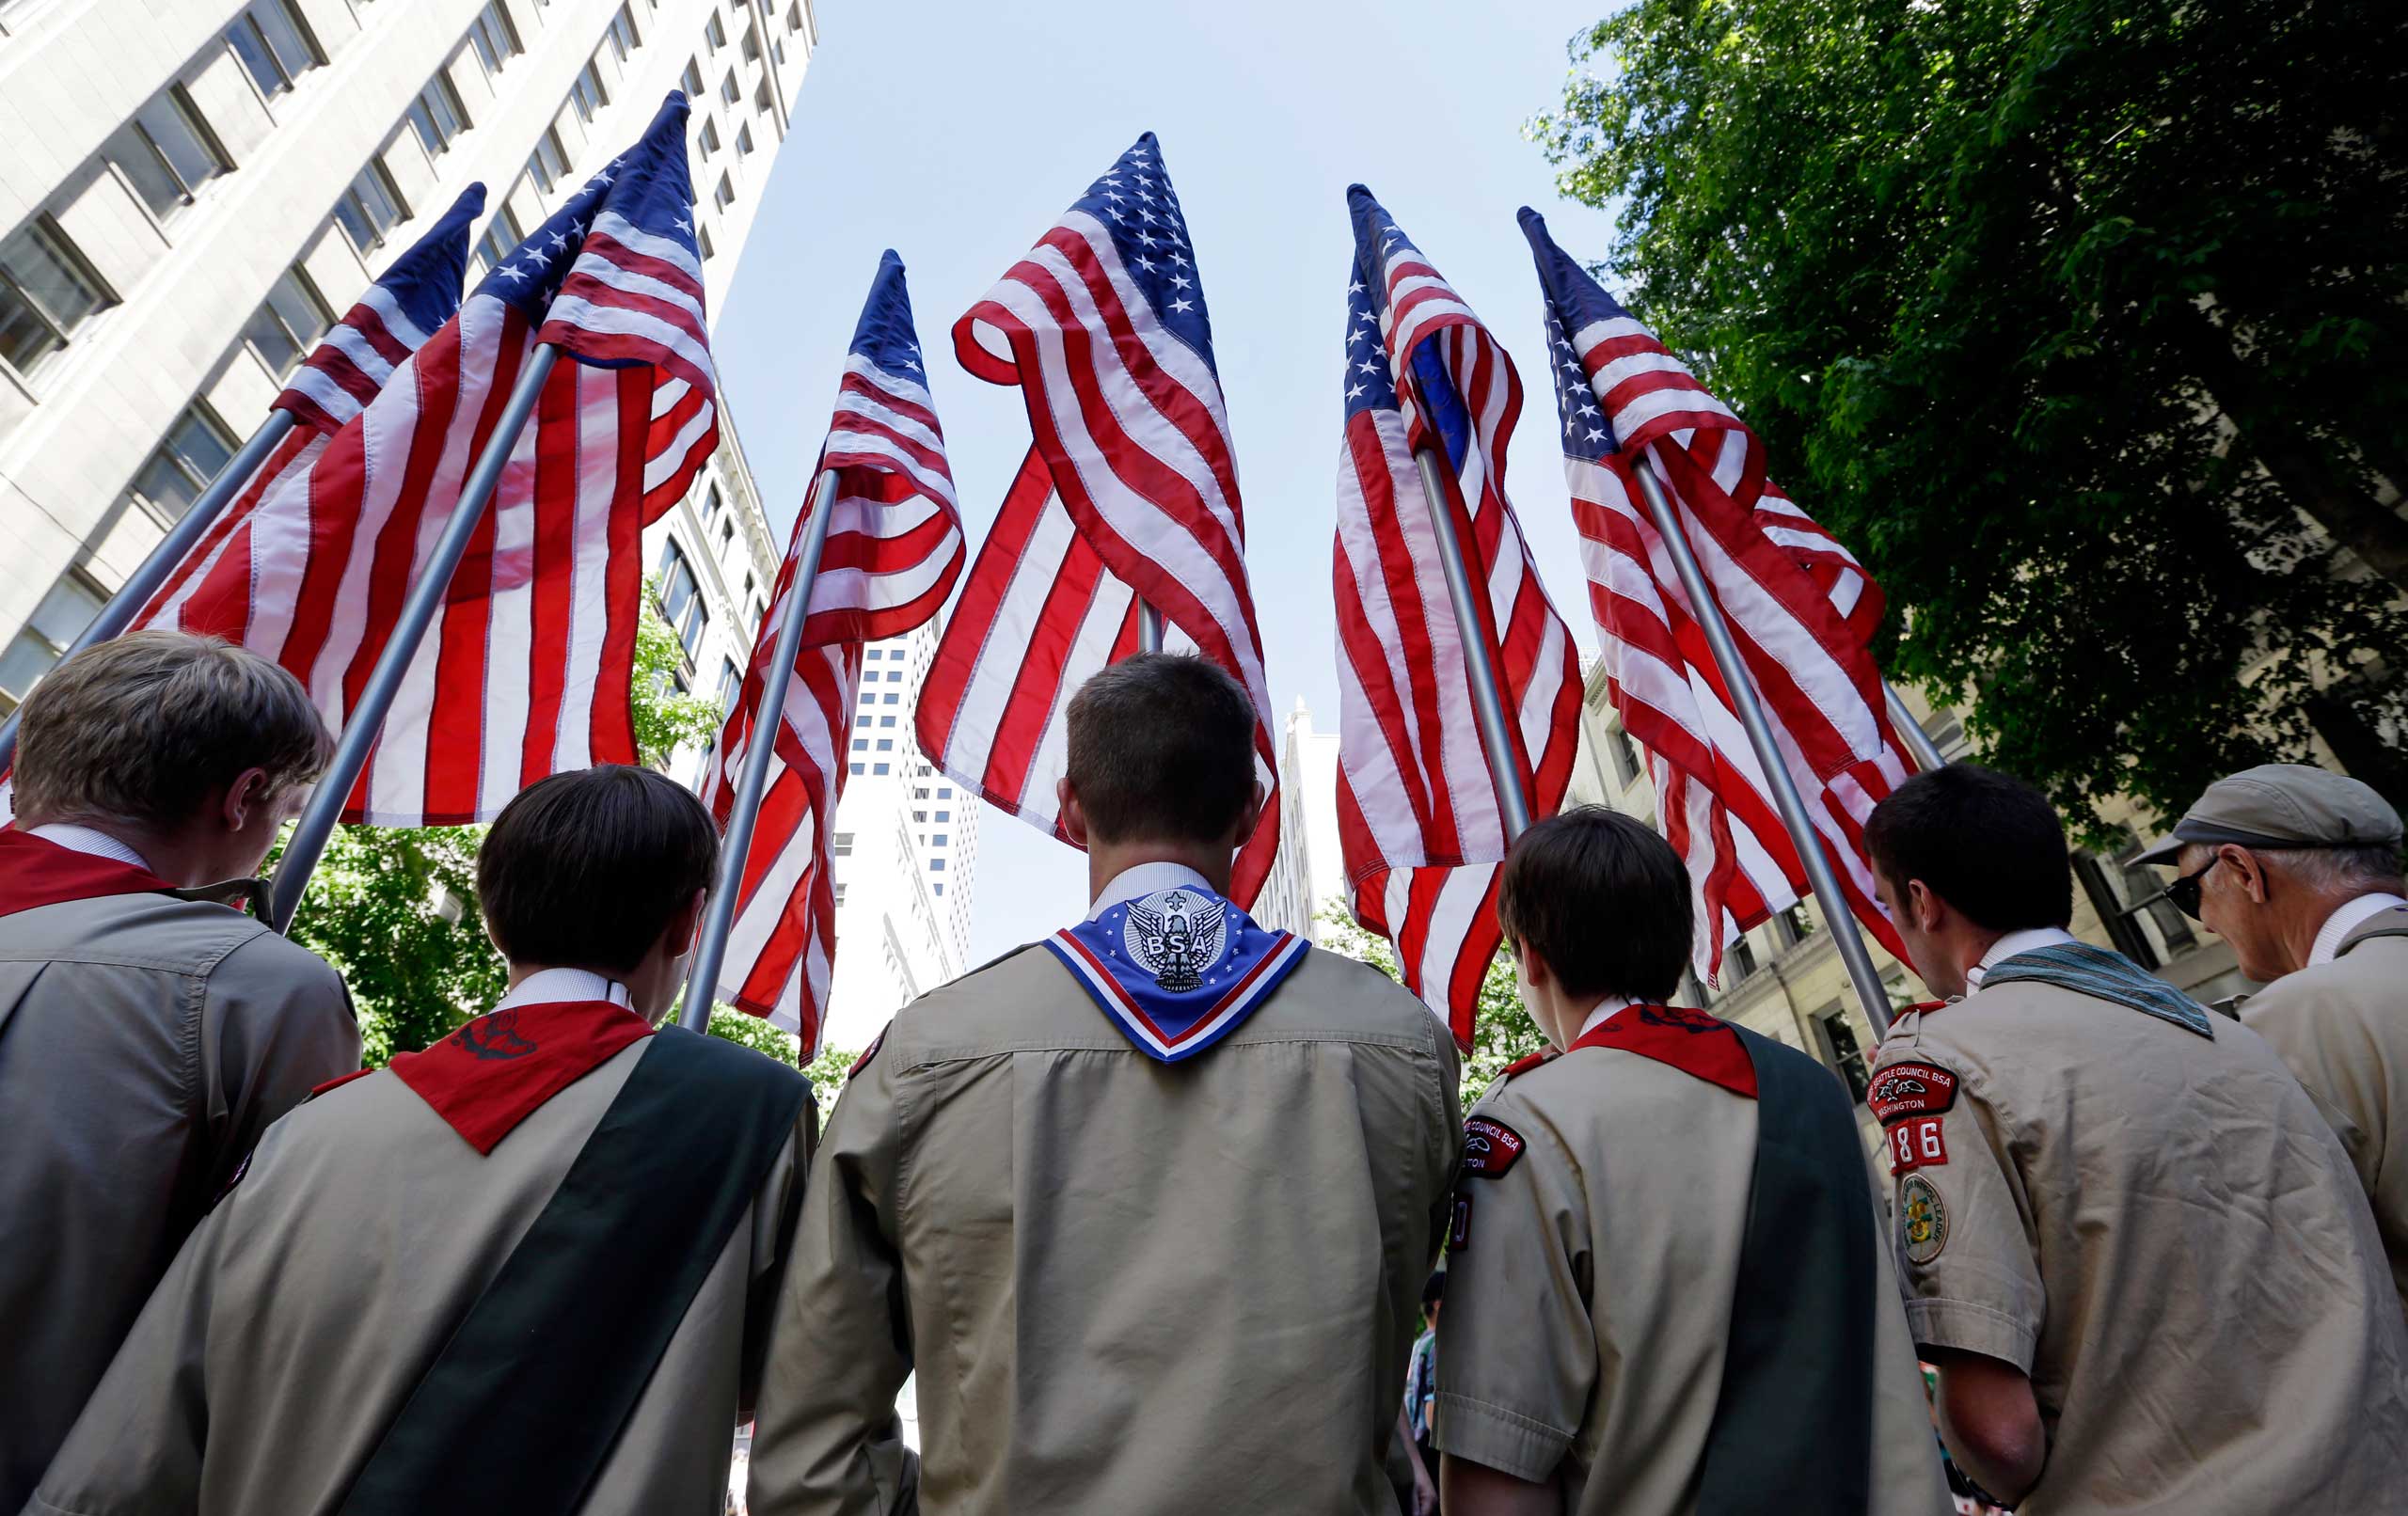 Boy Scouts from the Chief Seattle Council carry U.S. flags as they prepare to march in the Gay Pride Parade in downtown Seattle on June 30, 2013. (Elaine Thompson—AP)